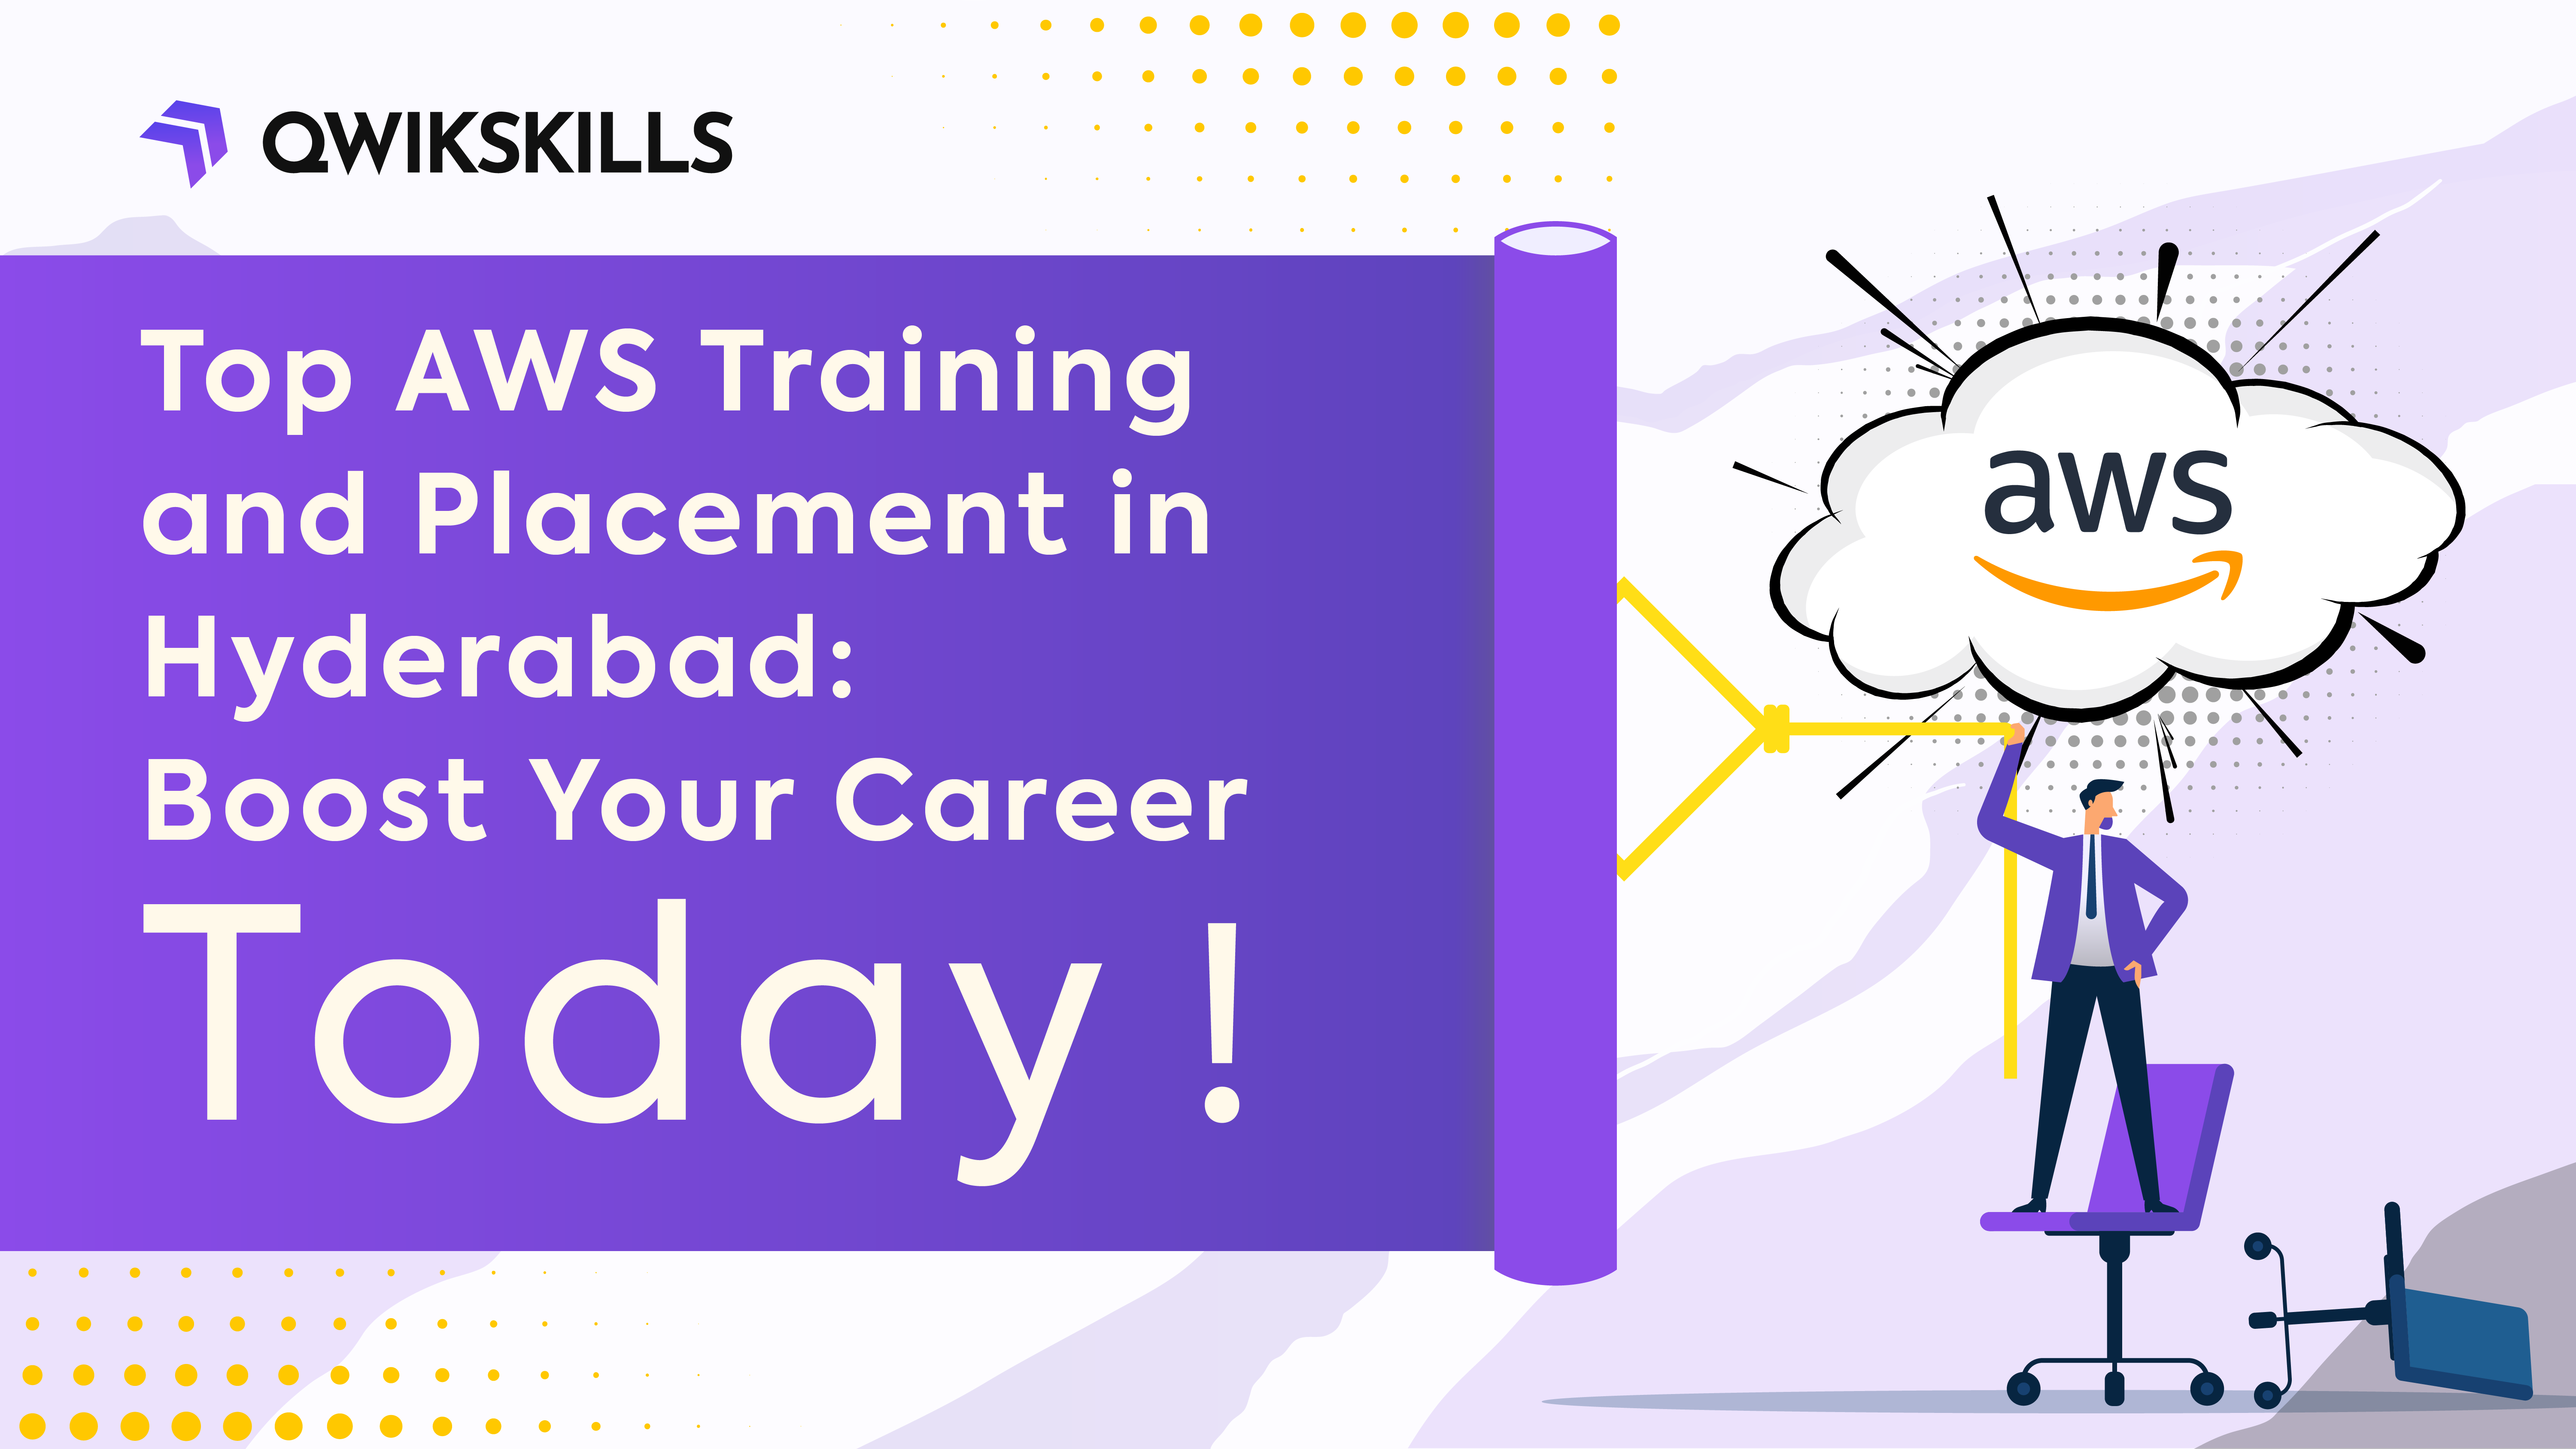 AWS training and placement in hyderabad